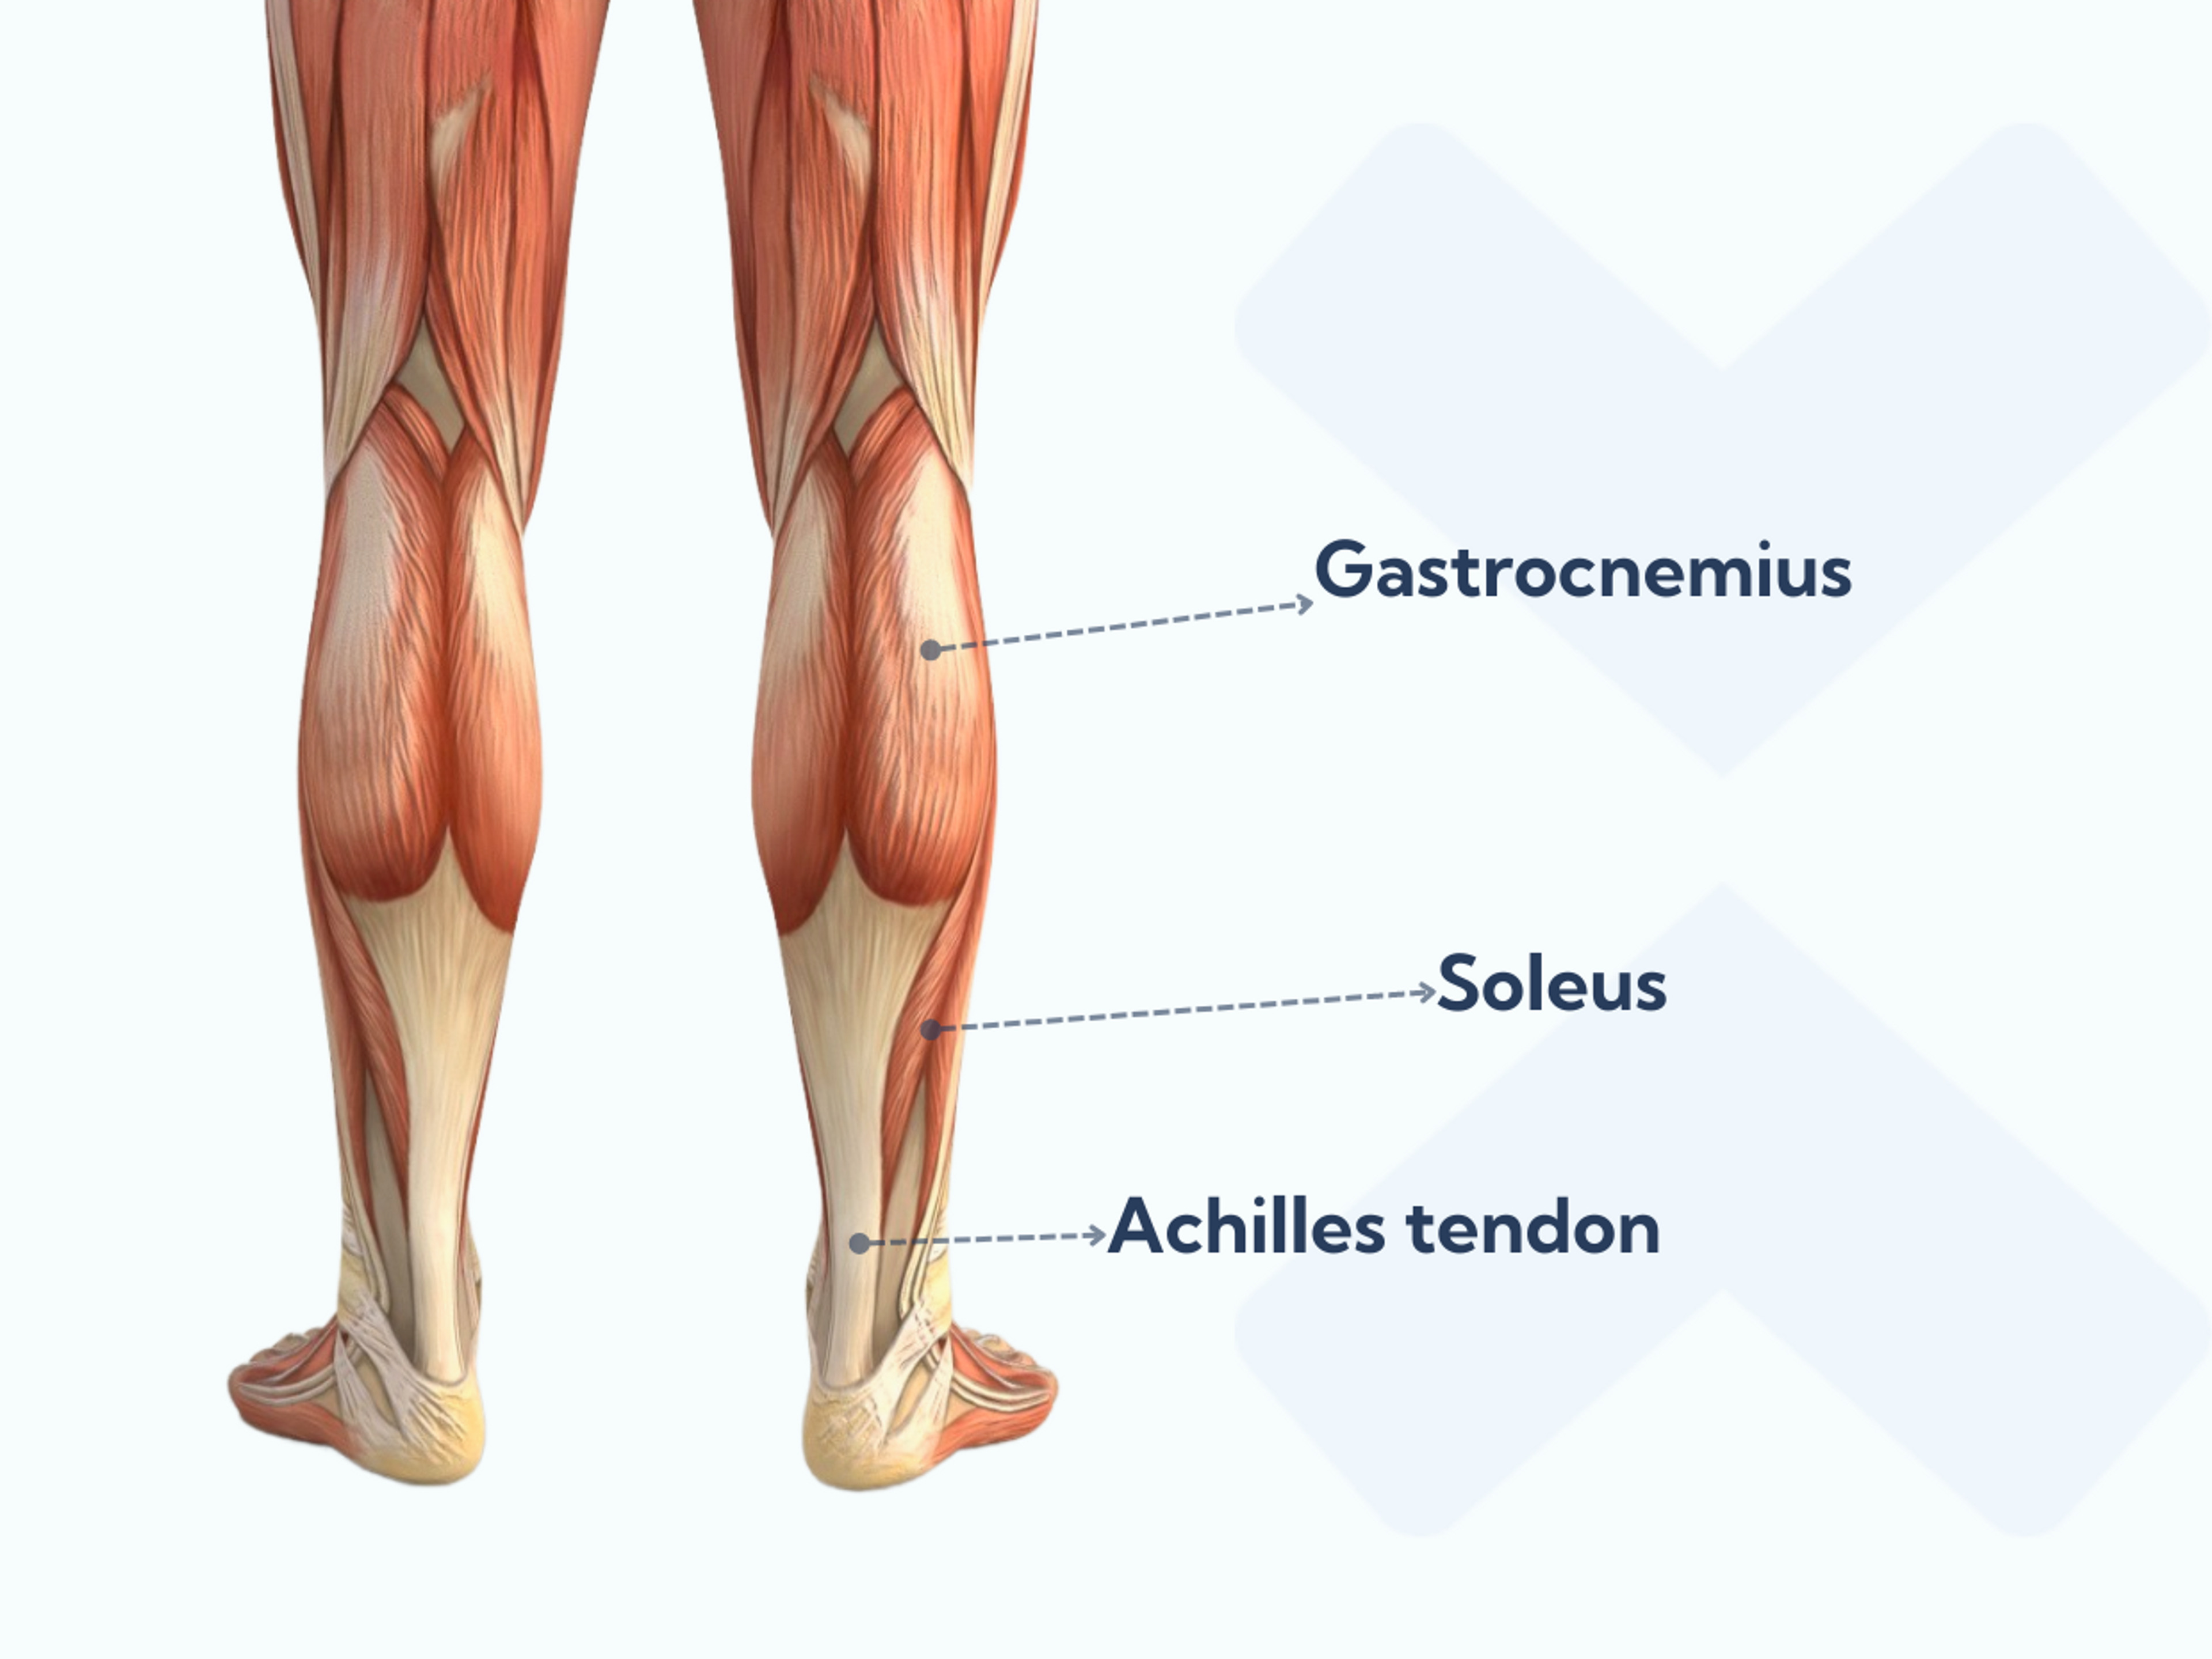 The gastrocnemius and soleus muscles make up calf muscles.